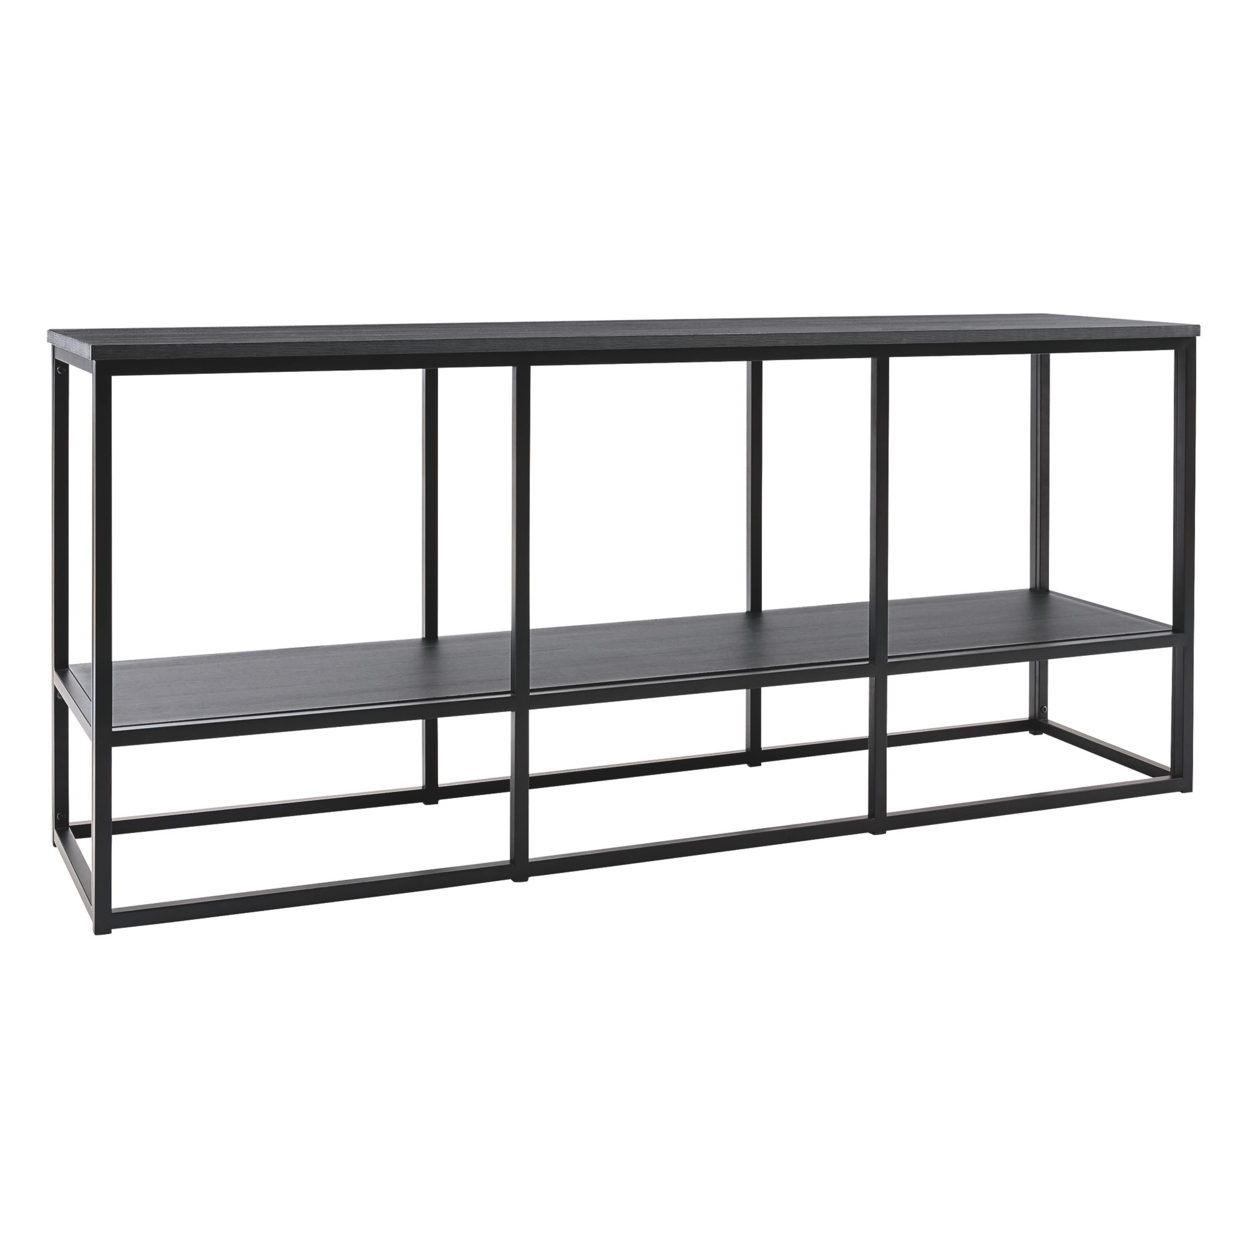 65 Inches Wood And Metal TV Stand With Open Shelf, Black- Saltoro Sherpi